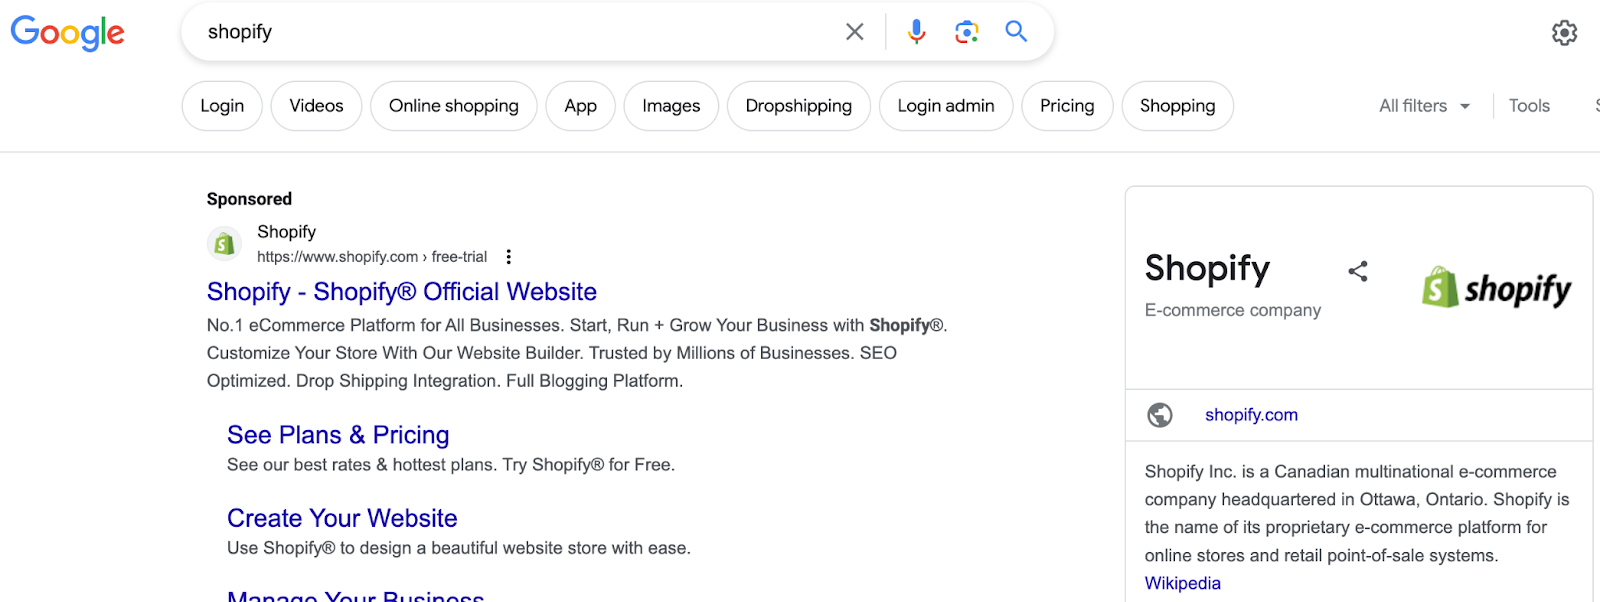 Google SERP for "Shopify" with the Shopify knowledge panel on the right side